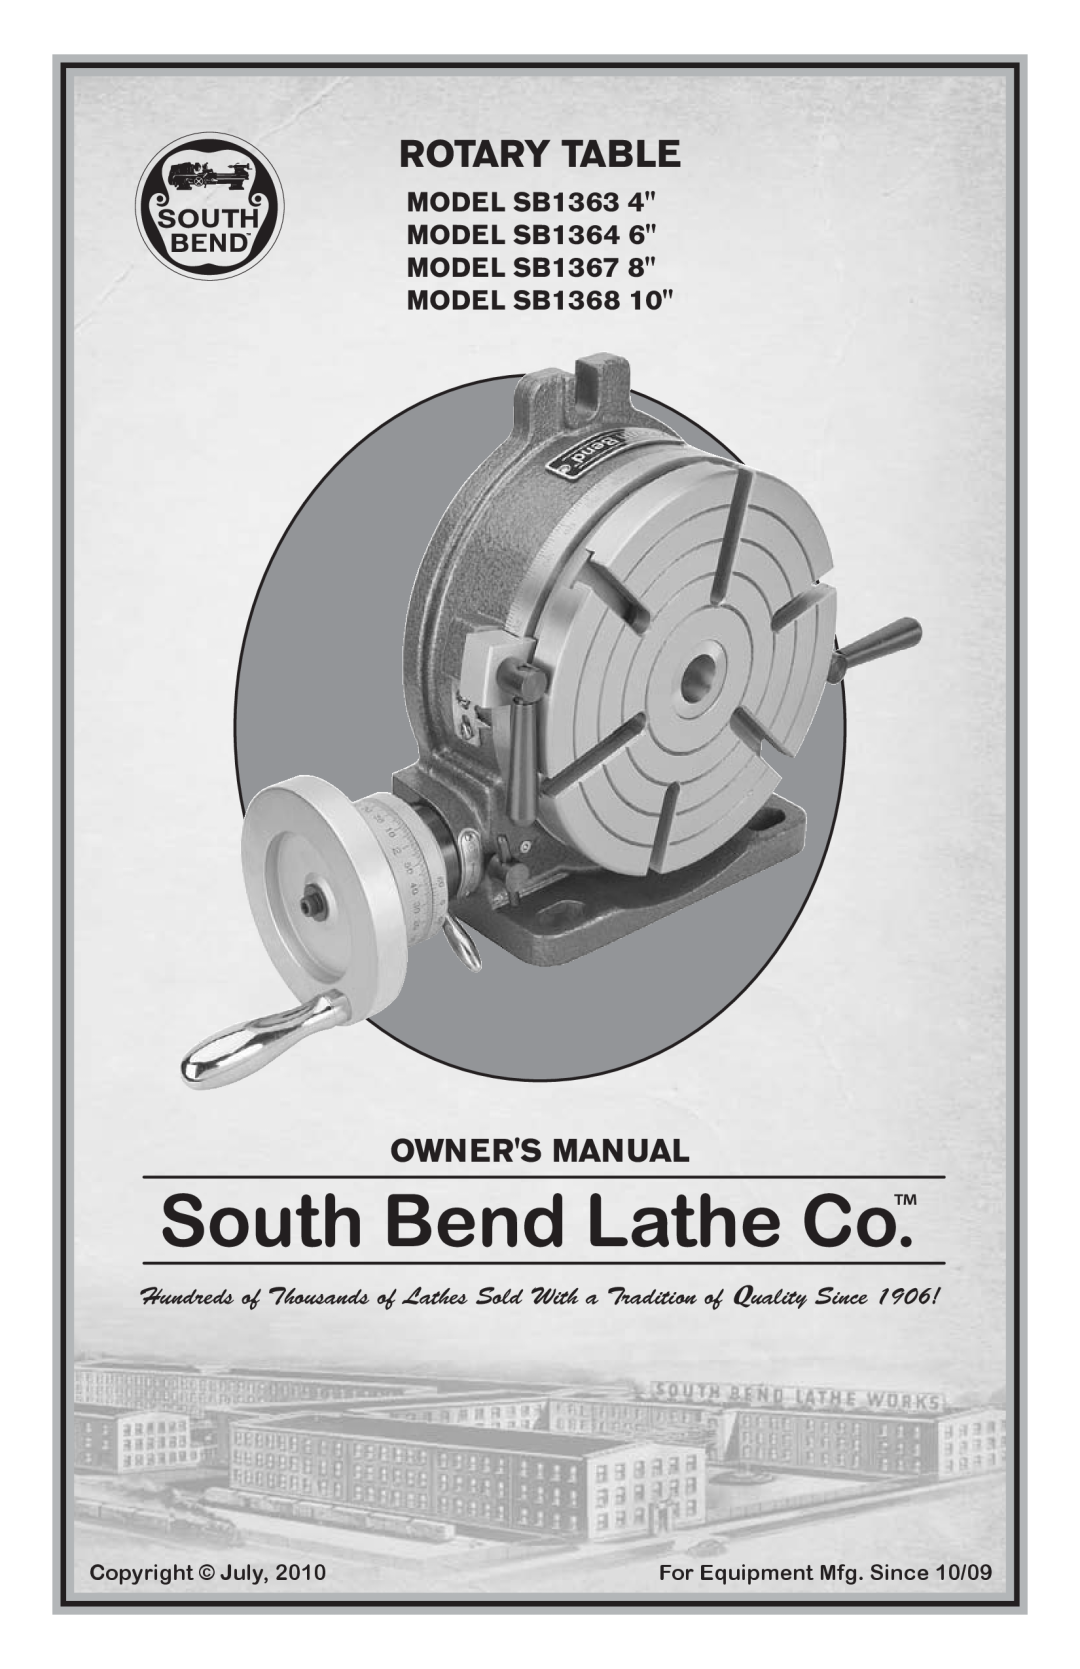 Southbend owner manual HEAVY 13 GEARHEAD LATHE, MODEL SB1049 13 X MODEL SB1050 13 X, For Machines Mfg. Since 5/11 